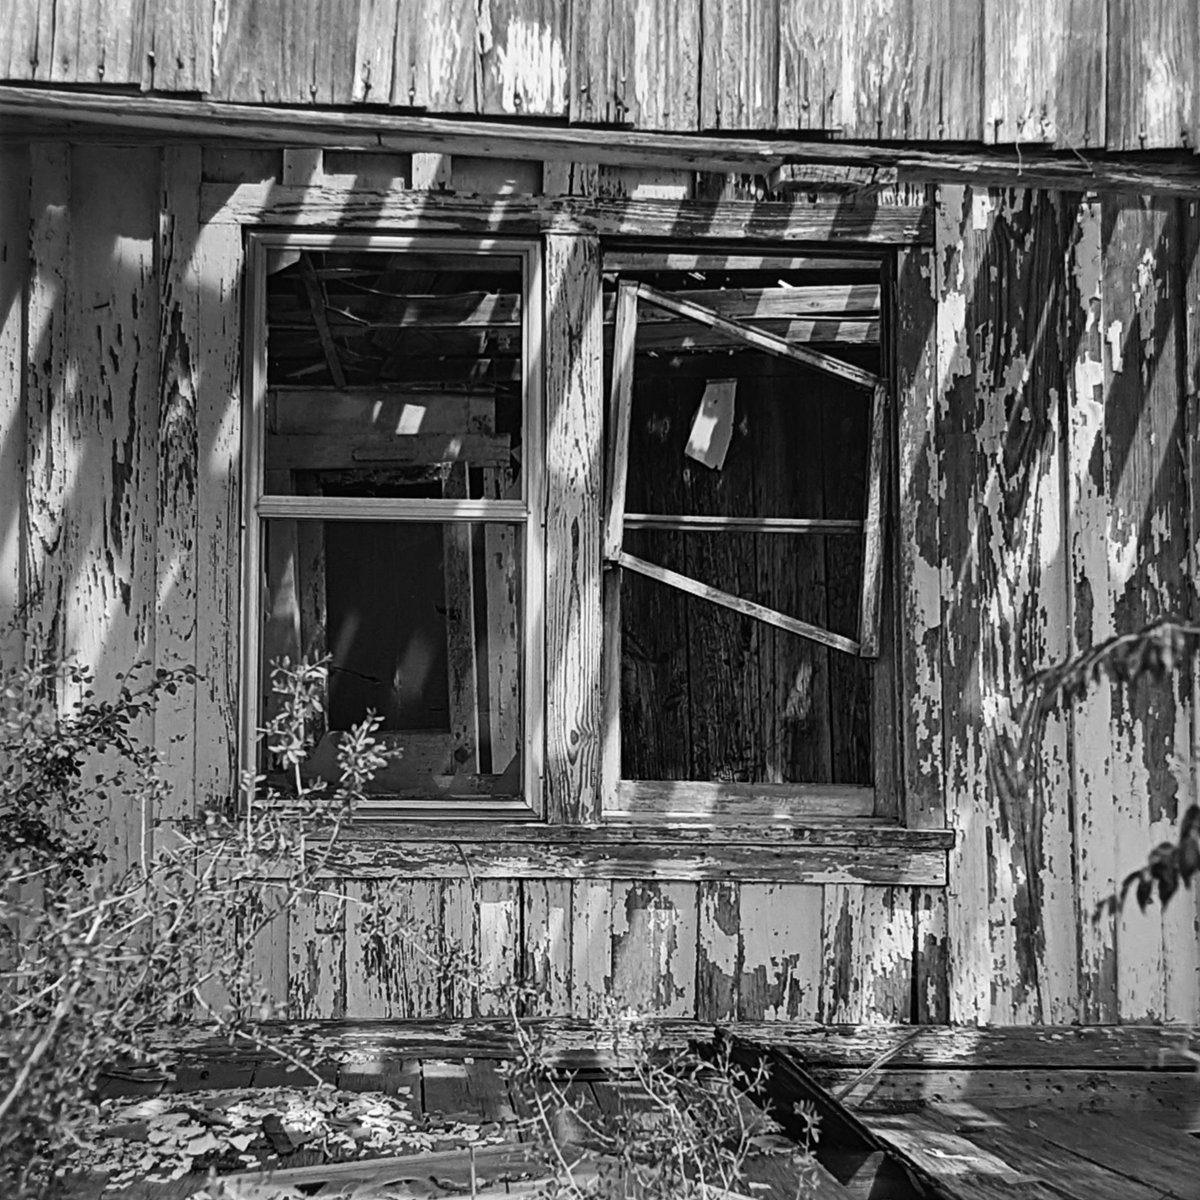 Abandoned house in west Texas. Mamiya C220f with 80mmf2.8 on Ilford Delta 100 dev'd in D76 #mediumformat #mamiya #c220 #film #shootfilm #ilfordphoto #westtexas #abandoned